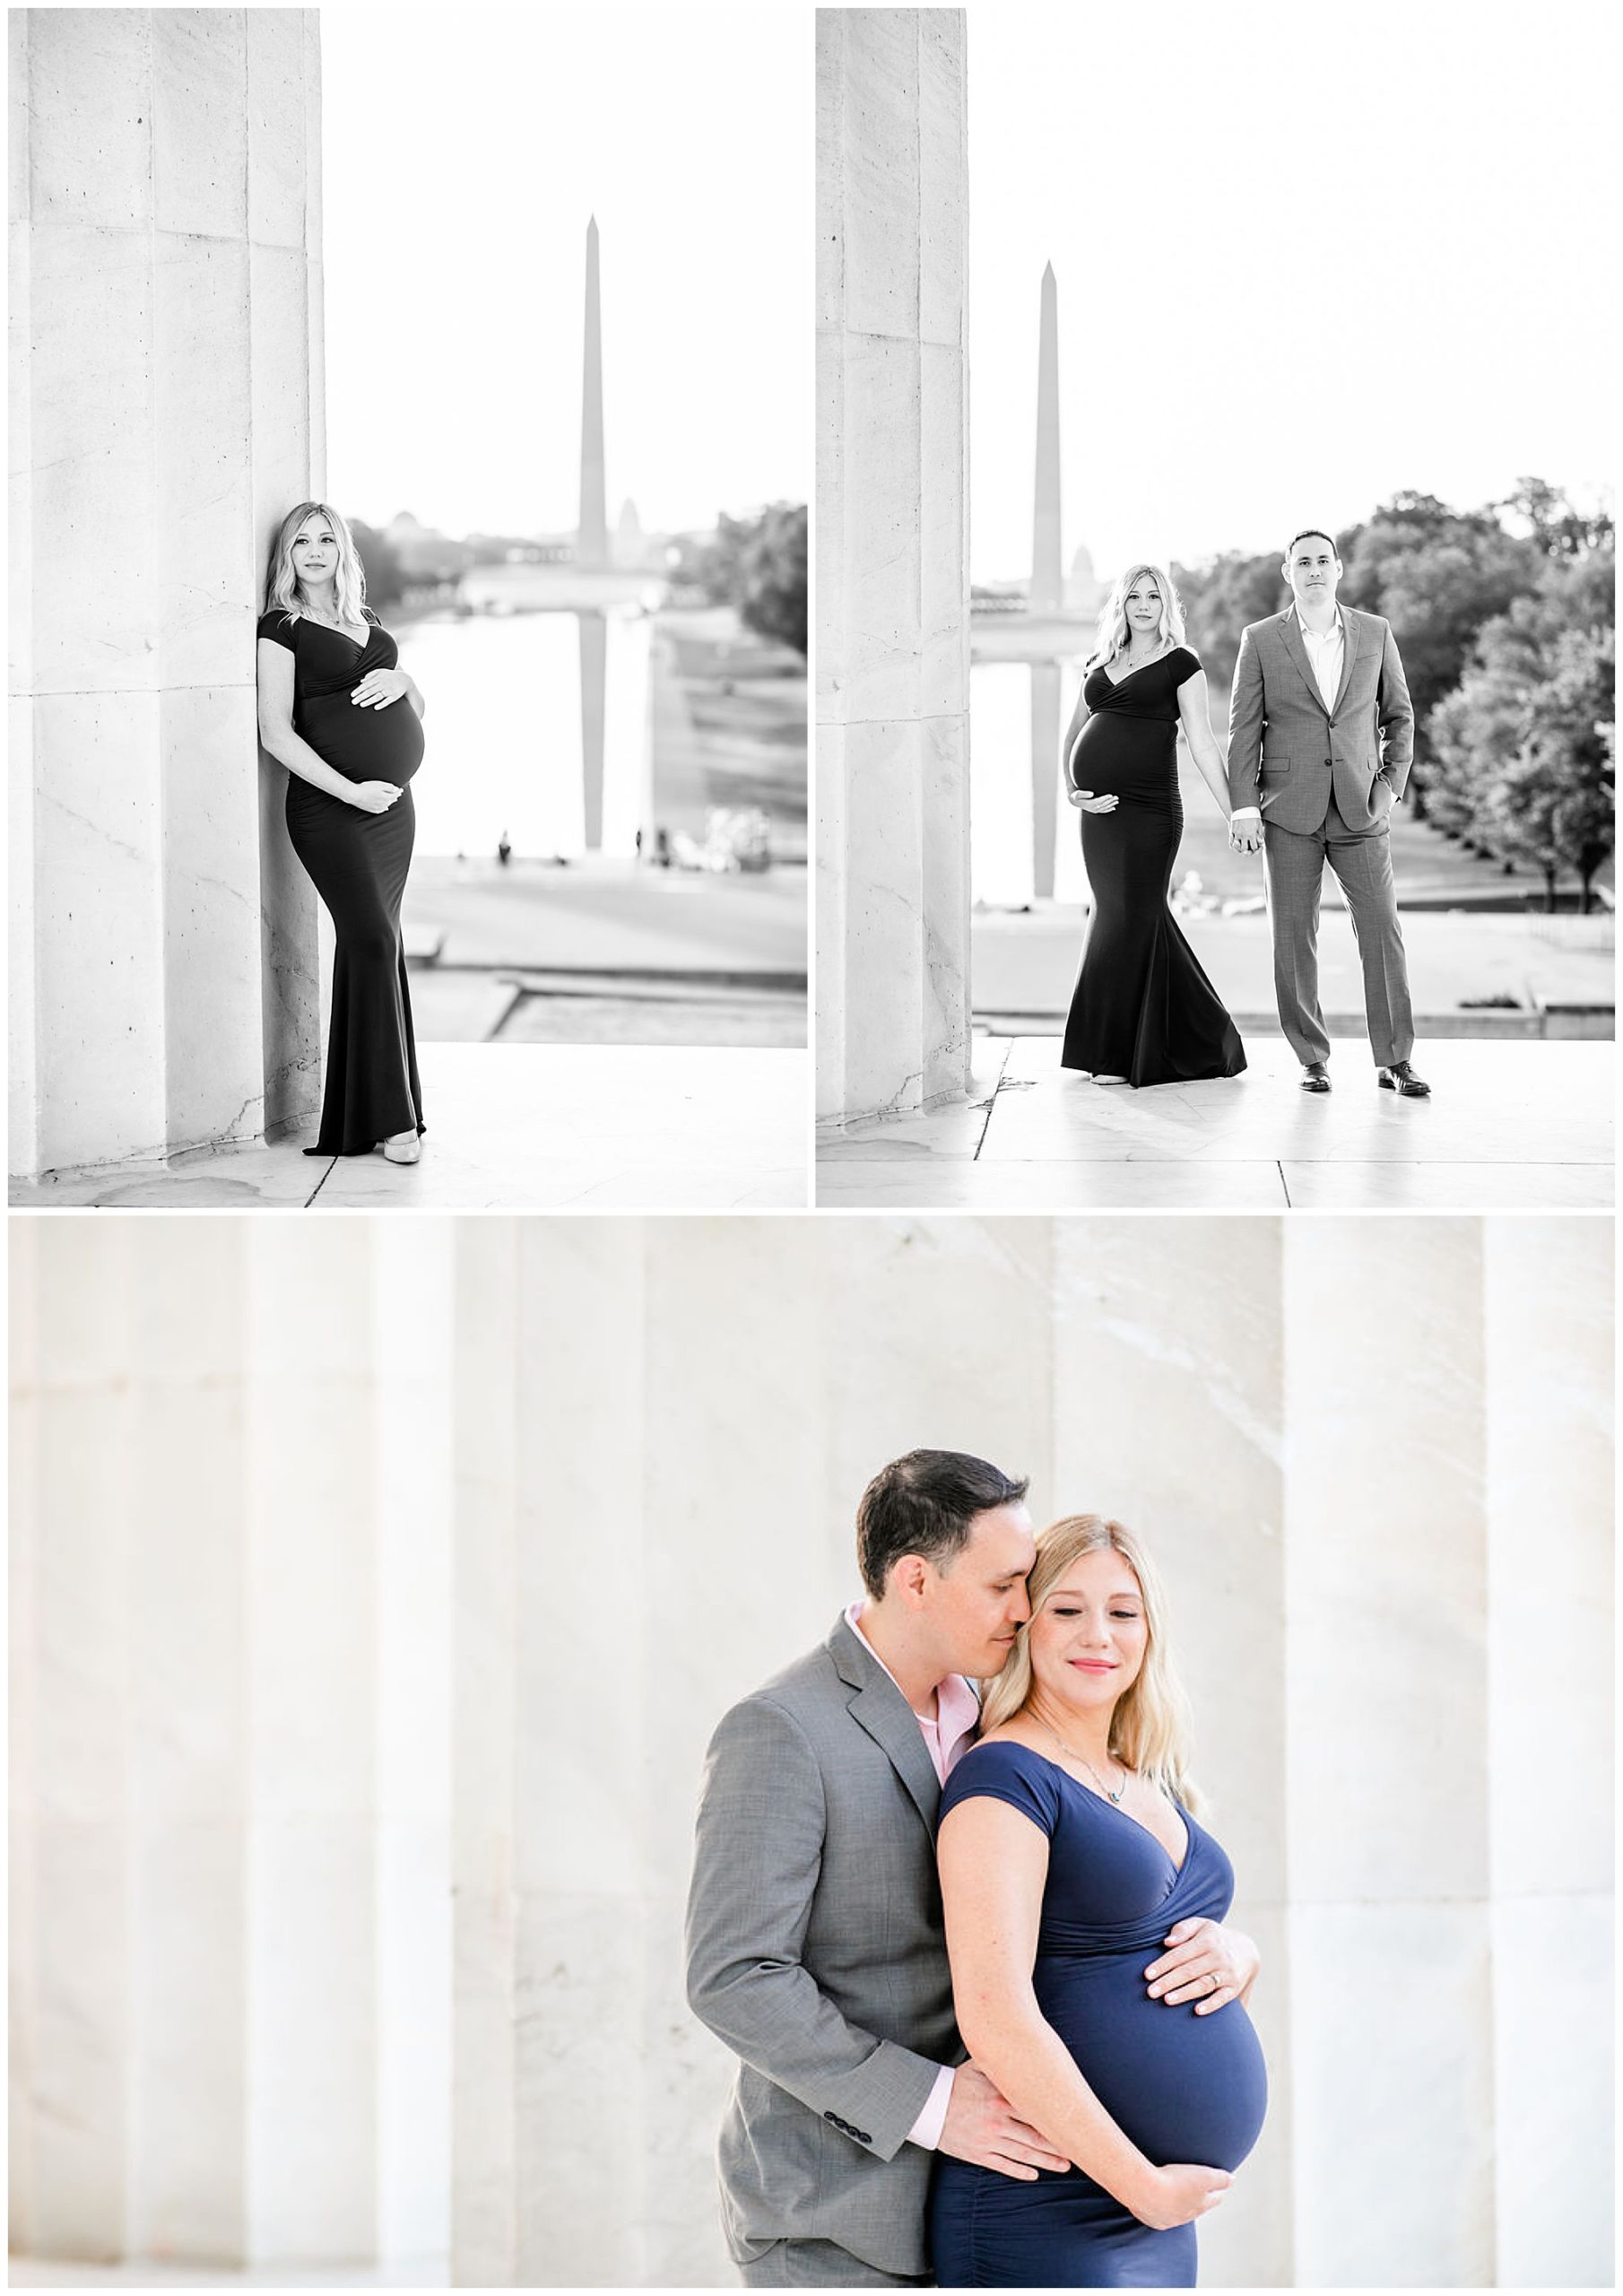 National Mall maternity photos, Lincoln Memorial maternity photos, Constitution Gardens maternity photos, DC maternity photos, DC maternity photographer, classic DC portraits, pregnant couple, natural light maternity photos, Rachel E.H. Photography, black and white, woman against pillar, man hugging woman from behind